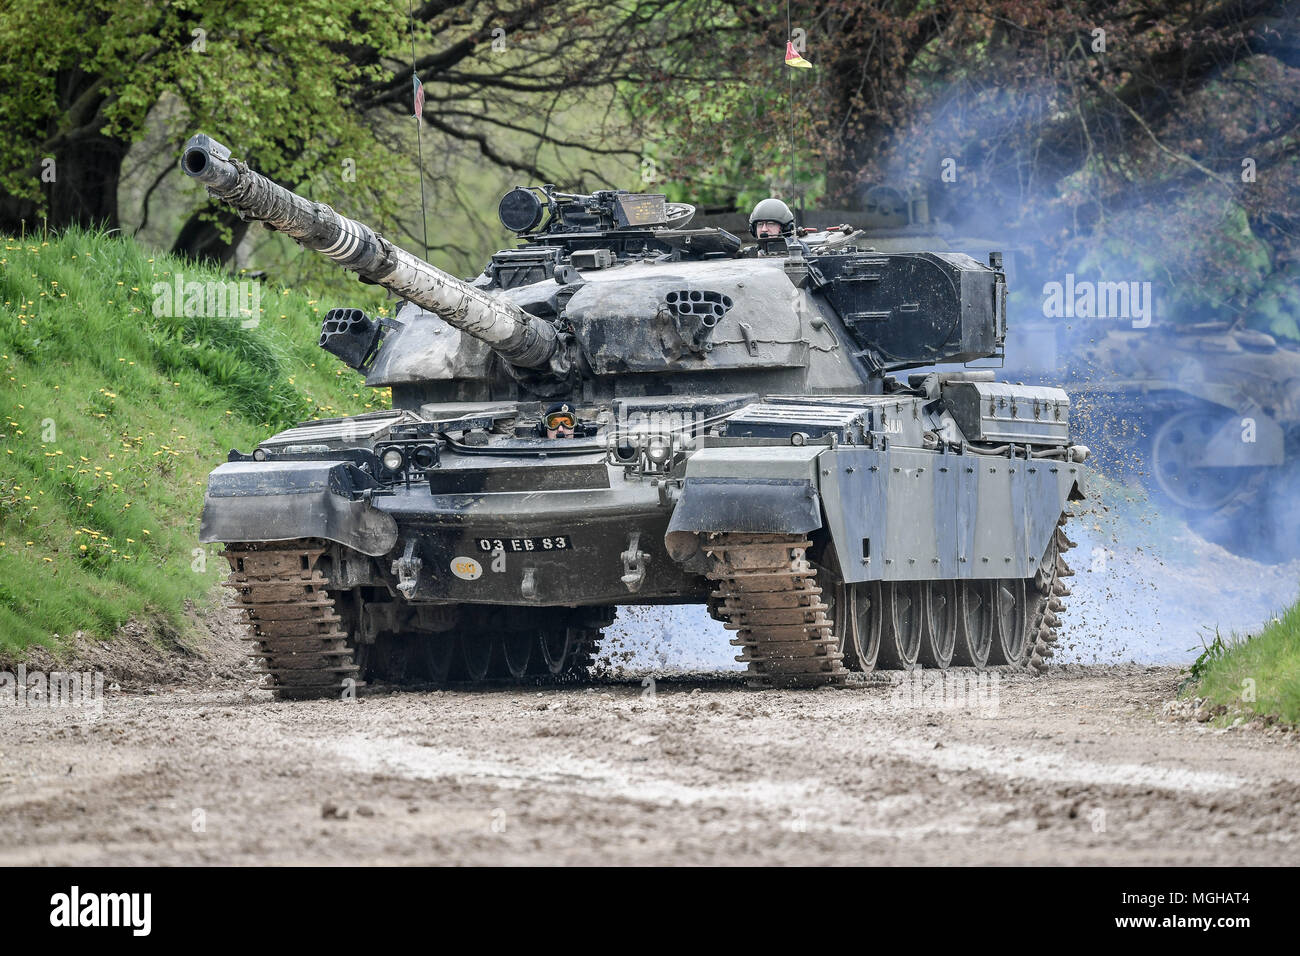 An FV4201 Chieftain main battle tank of the United Kingdom during the 1960s, 1970s and 1980s, drives around the tank course at the Tank Museum in Bovington, Dorset, as the attraction hosts &quot;Tiger Day&quot; to mark the 75th anniversary of the world's only working Tiger Tank's capture in 1943 in the Tunisian desert. Stock Photo